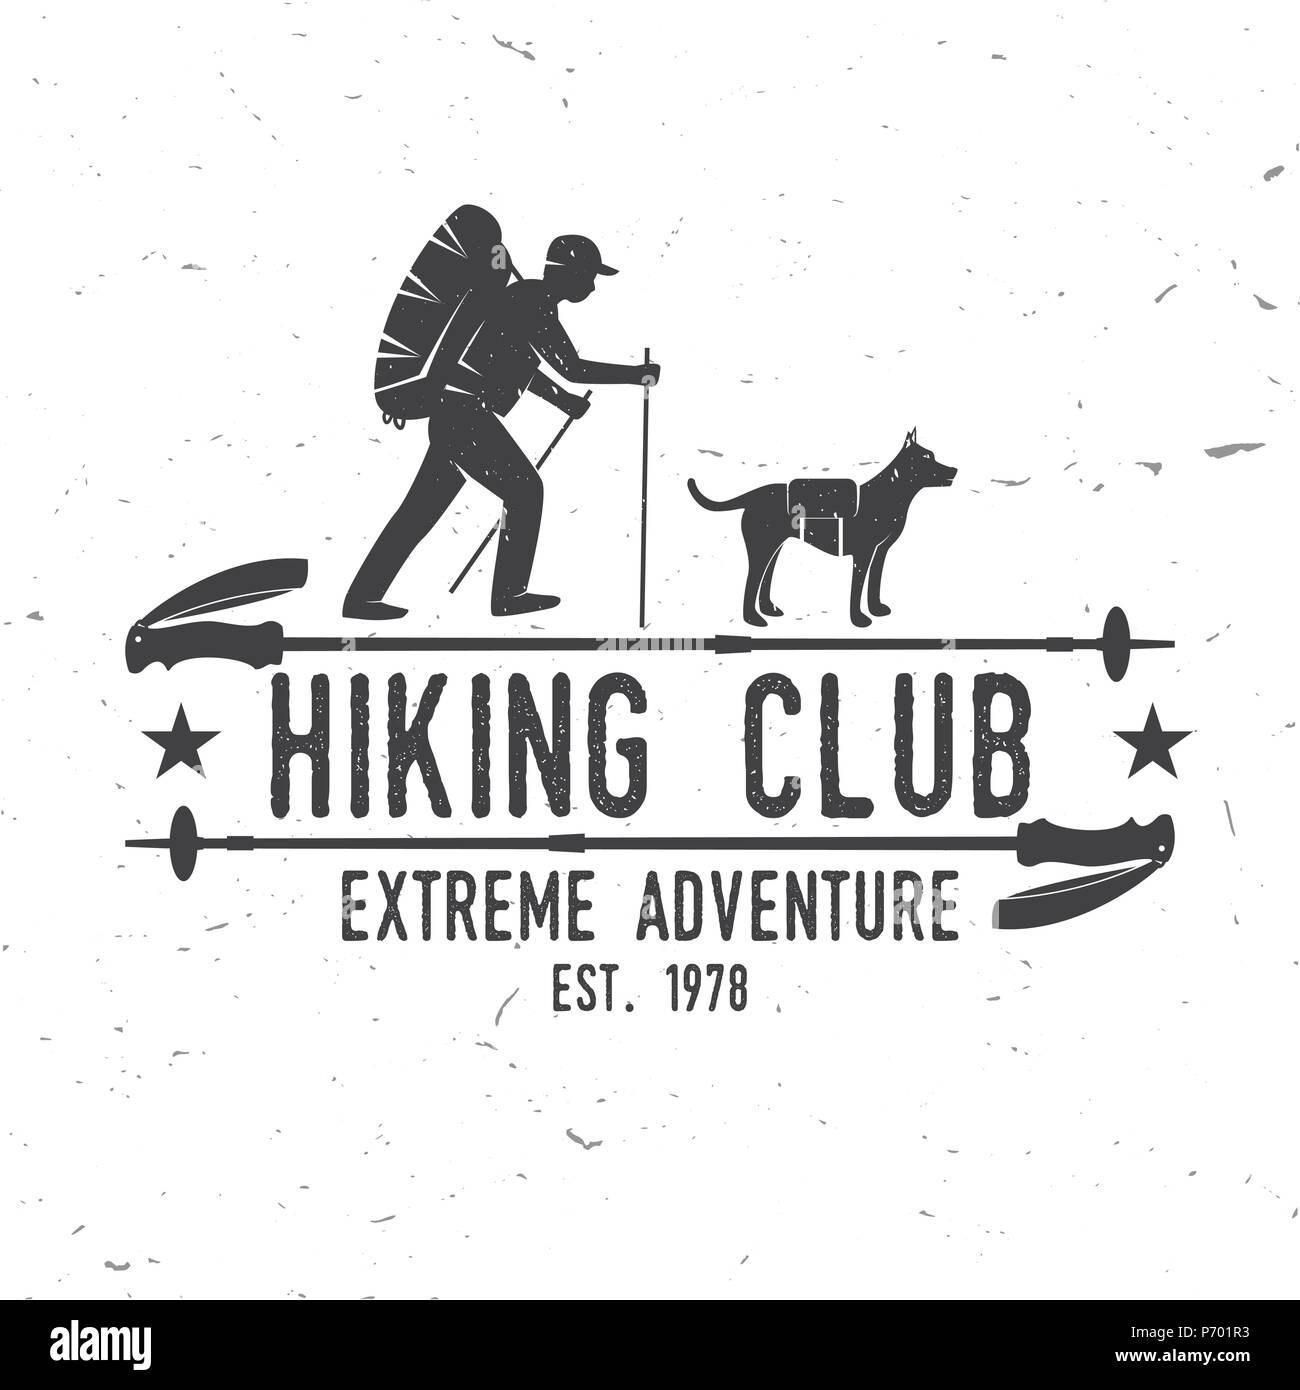 Hiking club Extreme adventure. Vector illustration. Concept for shirt or logo, print, stamp. Design with hiker, dog and hiking stick. Stock Vector